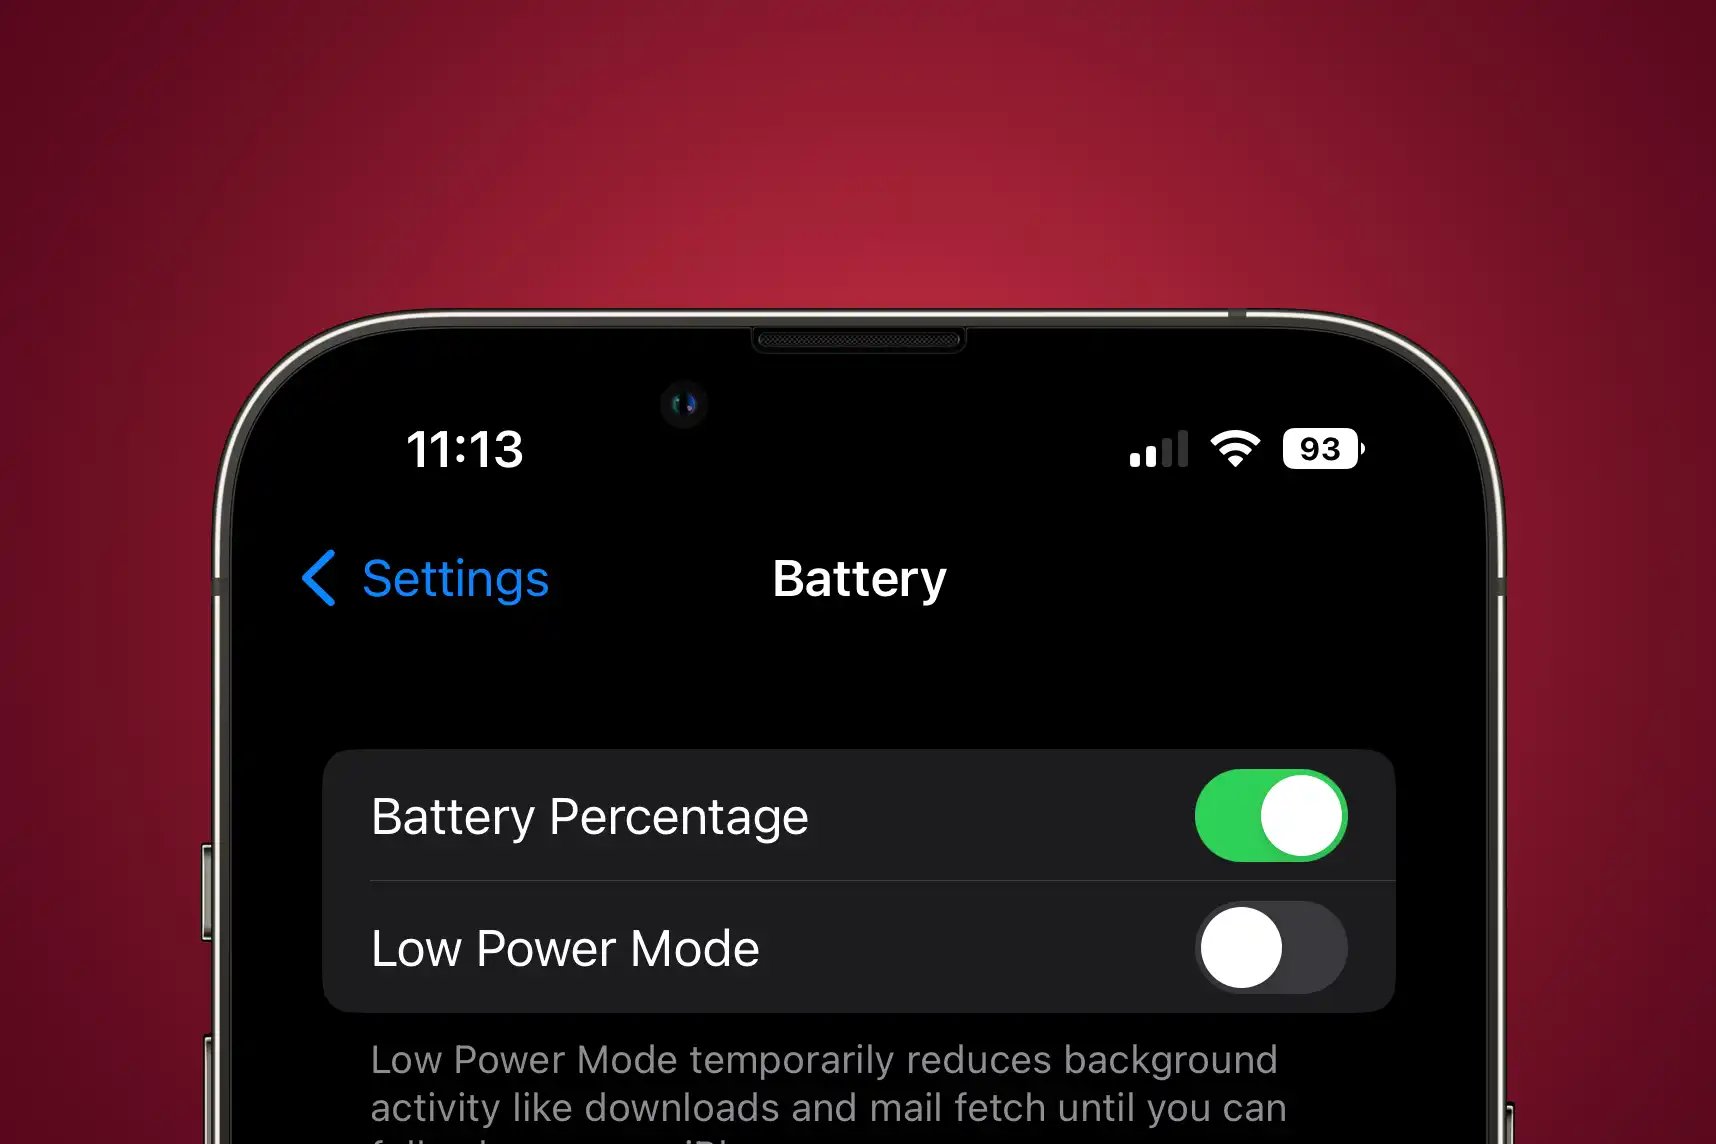 ios-16-battery-percentage-will-reach-iphone-11-iphone-xr-and-more